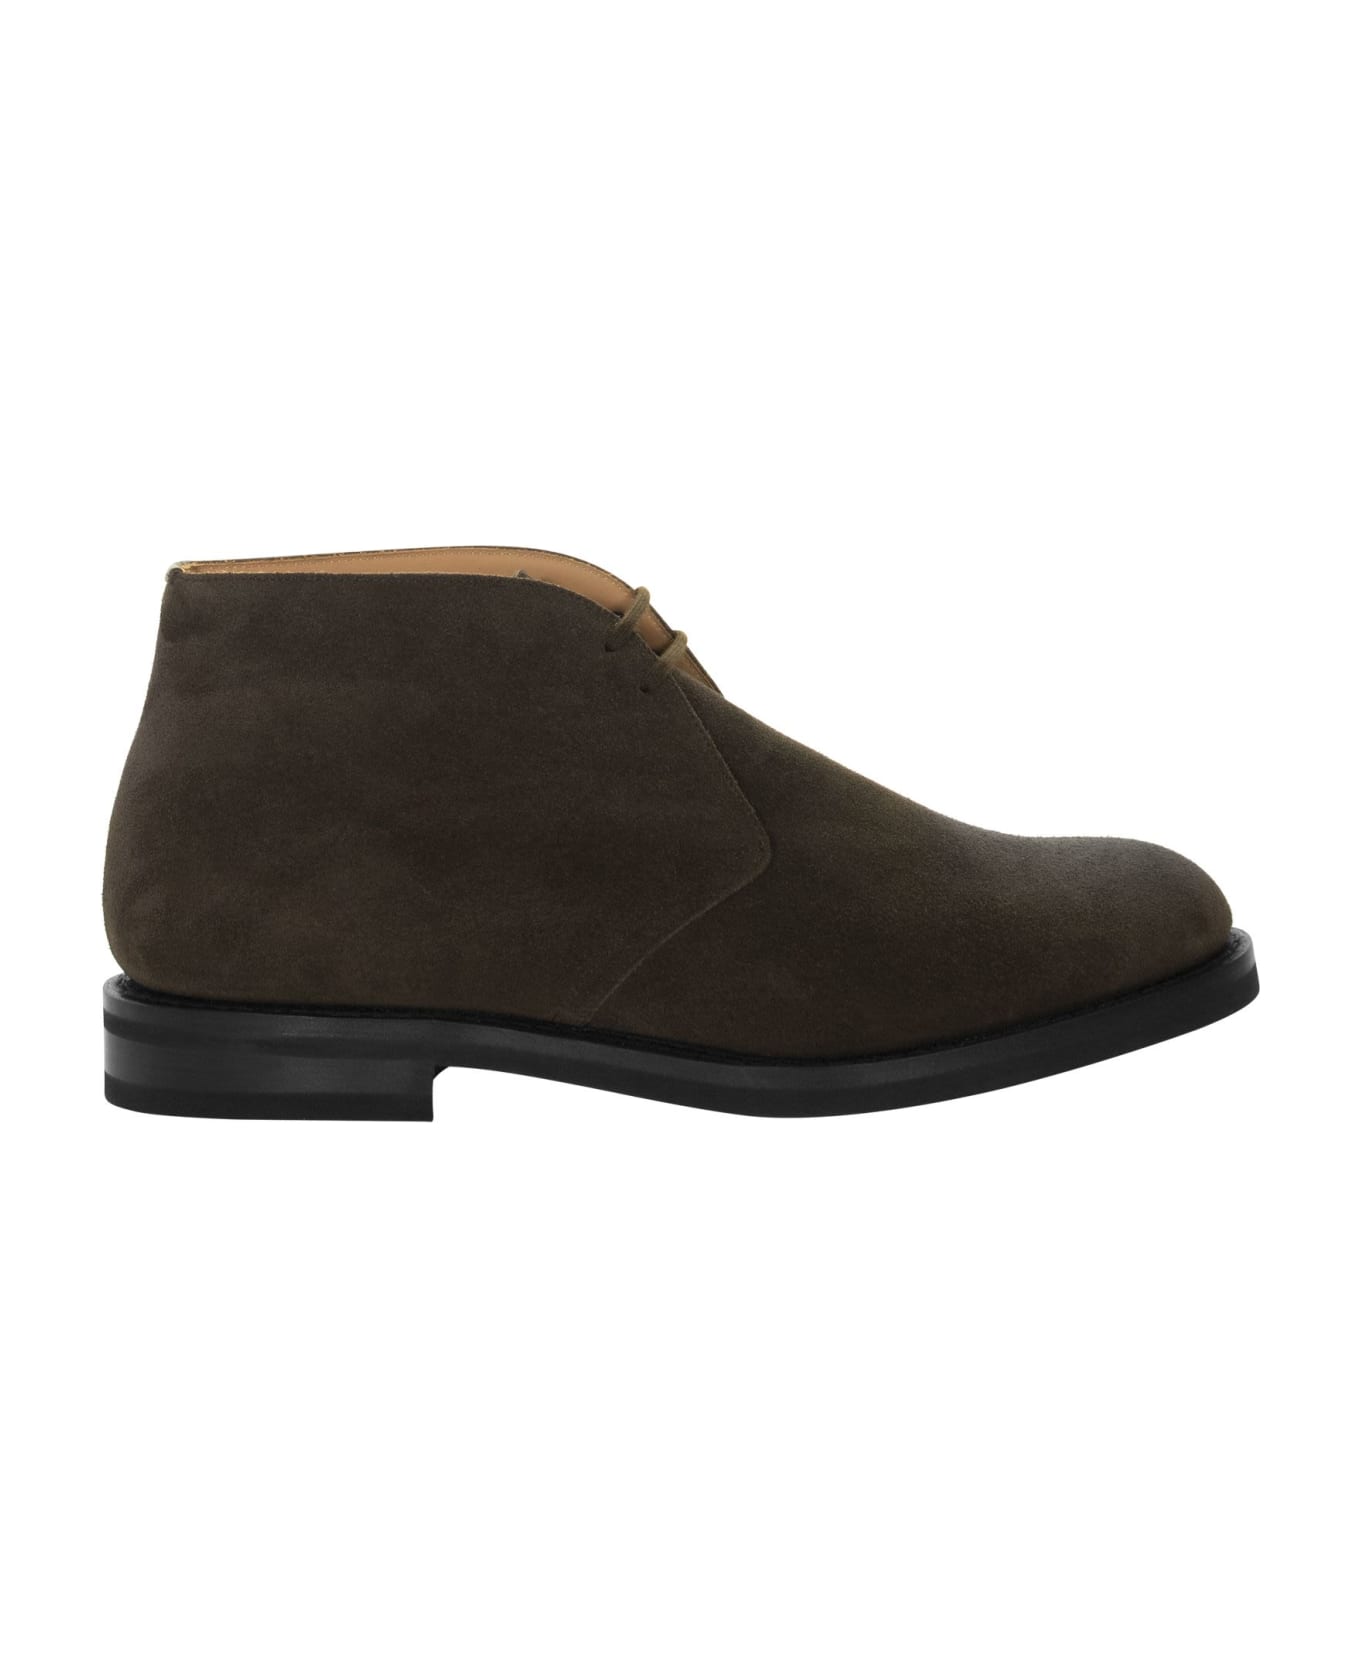 Church's Ryder - Suede Leather Ankle Boot - BROWN